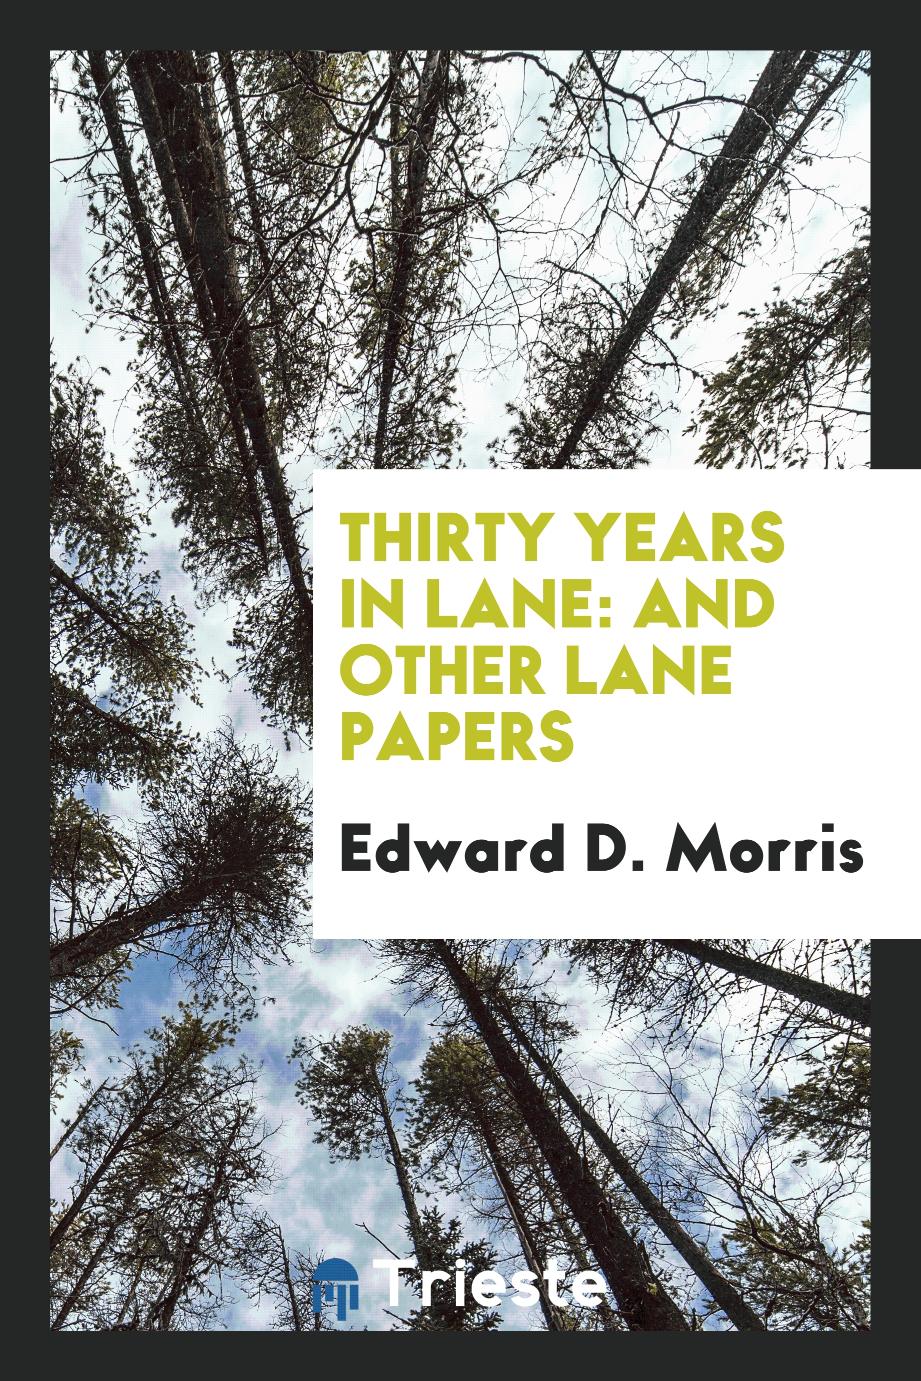 Thirty years in Lane: and other Lane papers